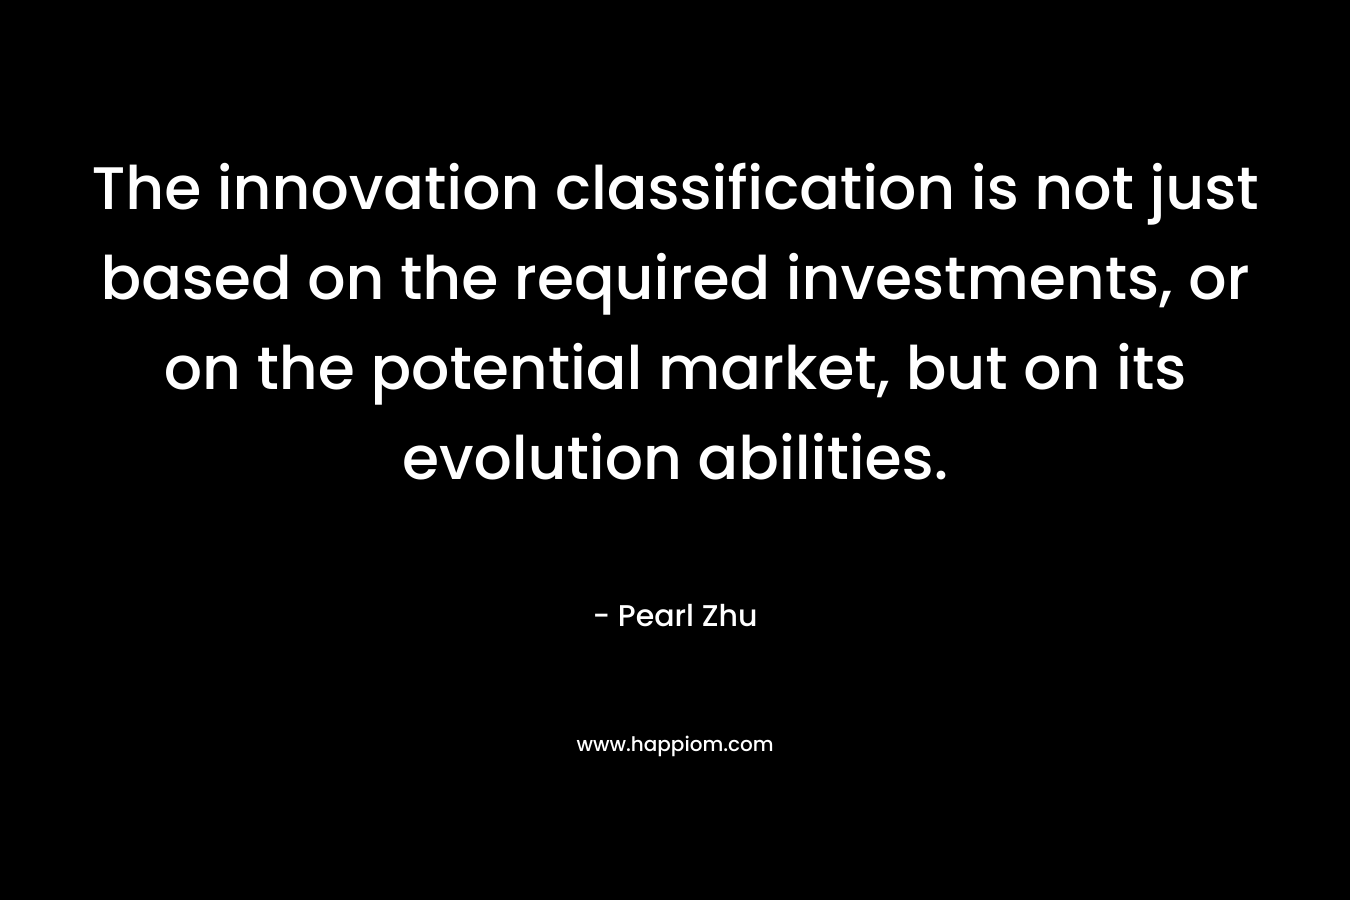 The innovation classification is not just based on the required investments, or on the potential market, but on its evolution abilities.